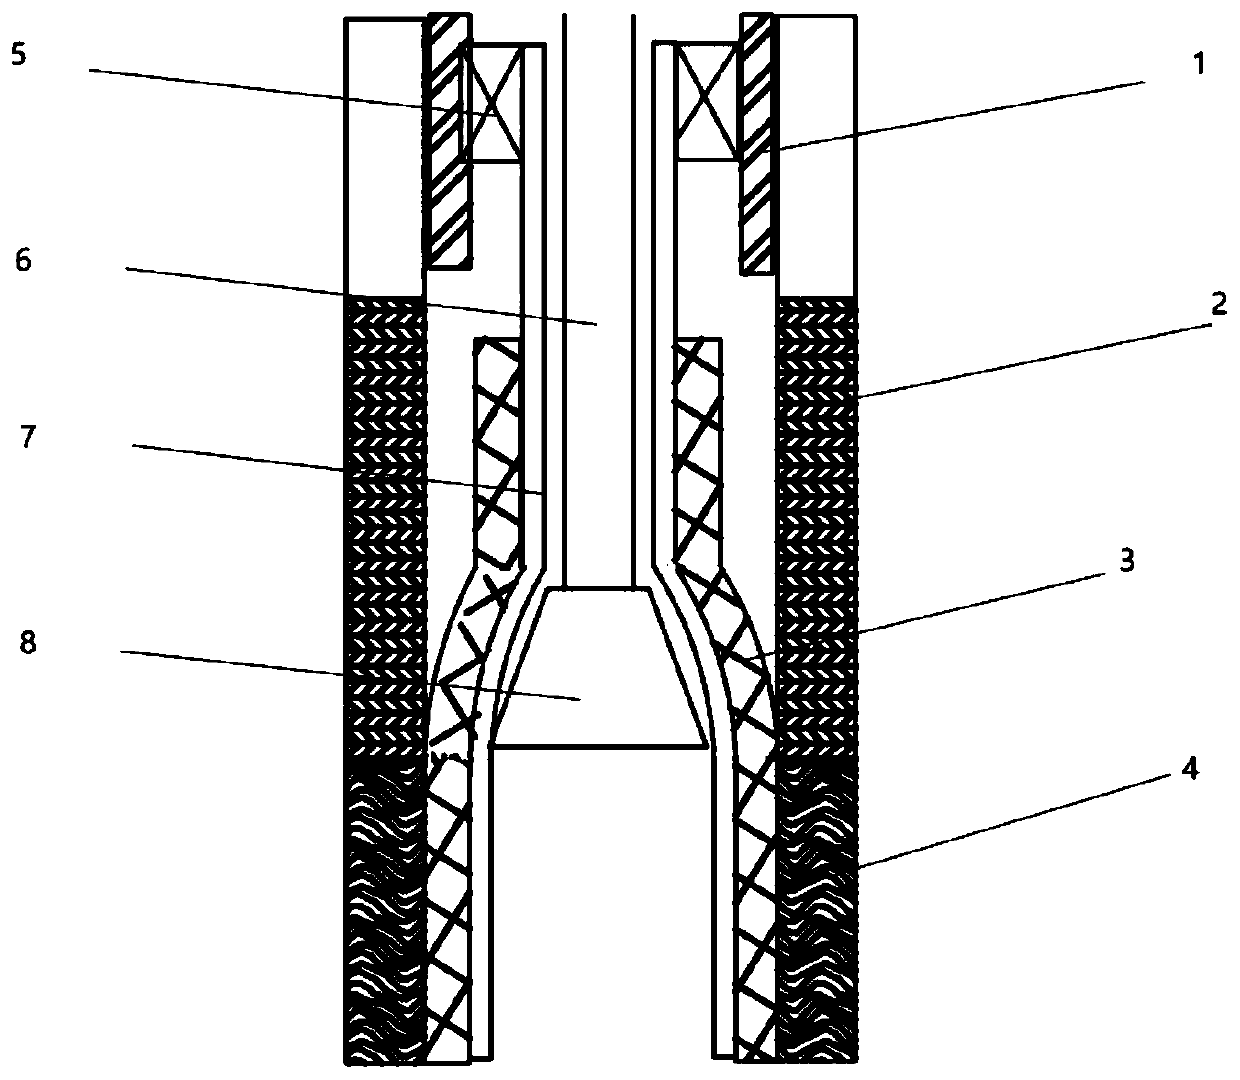 Artificial borehole wall for preventing mudstone formation mud from being produced or channeling, forming method and well-completion structure